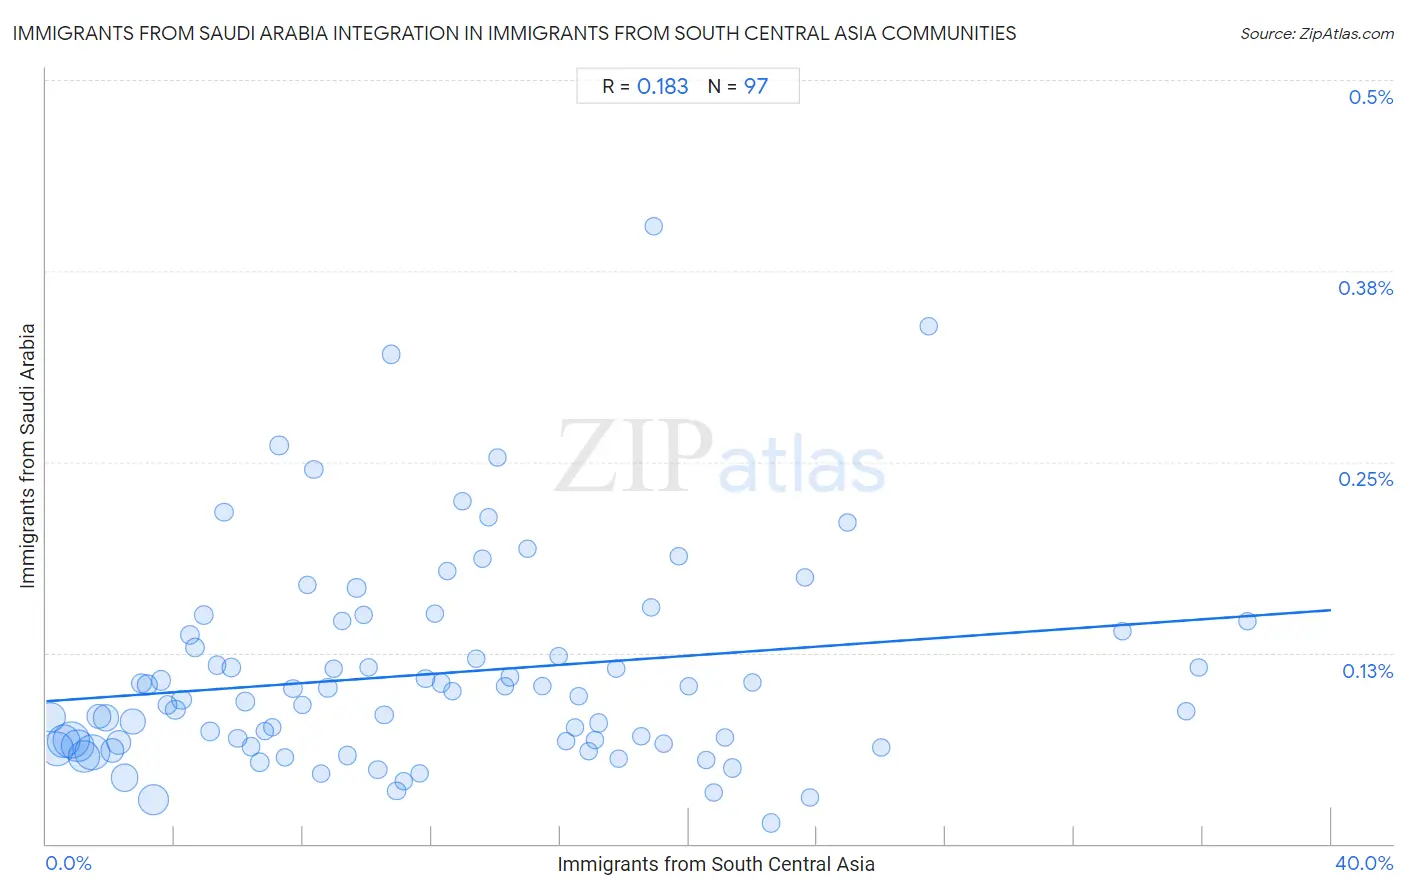 Immigrants from South Central Asia Integration in Immigrants from Saudi Arabia Communities